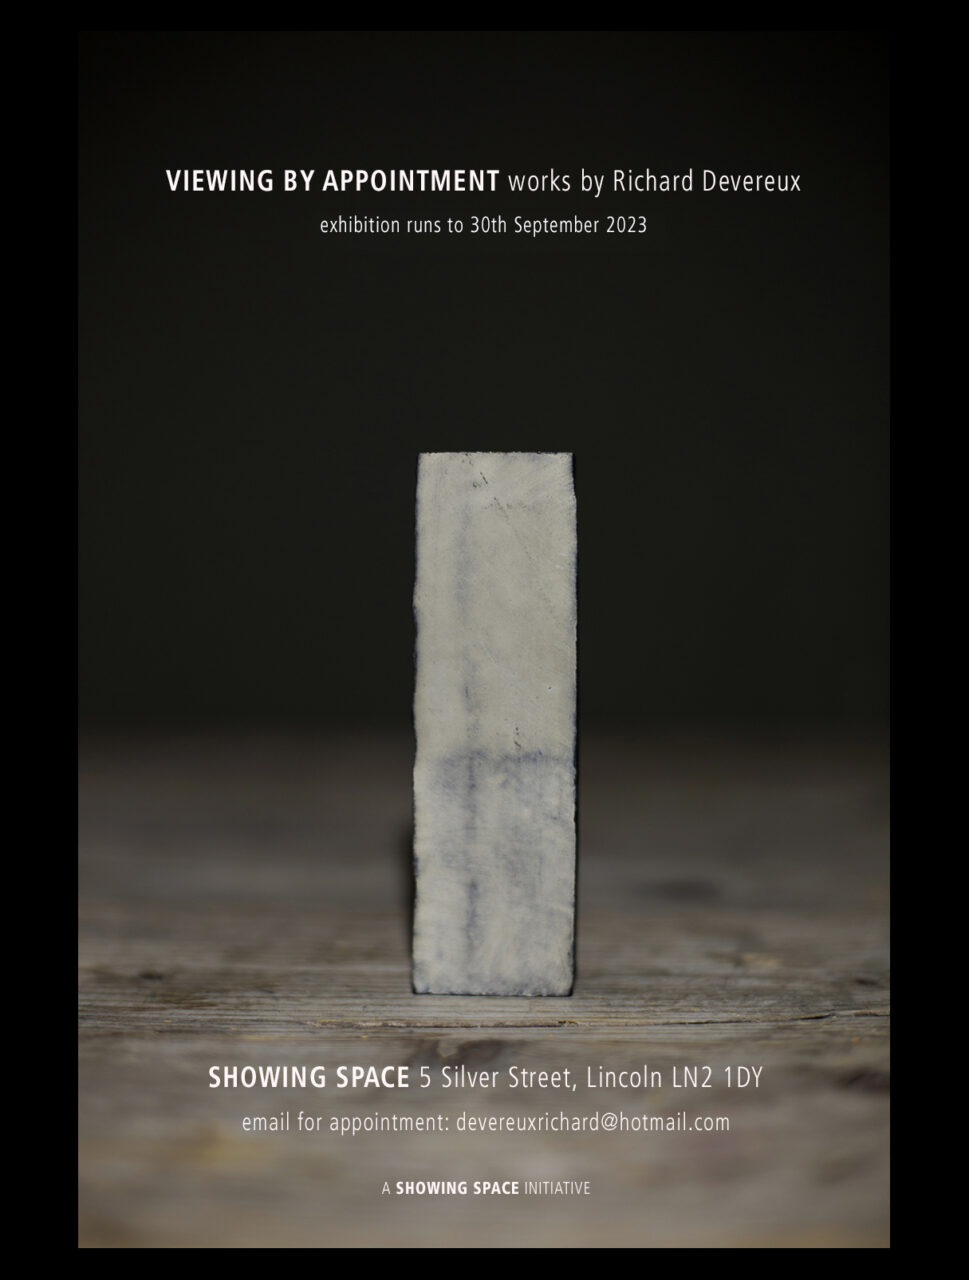 Richard Devereux - viewing by appointment